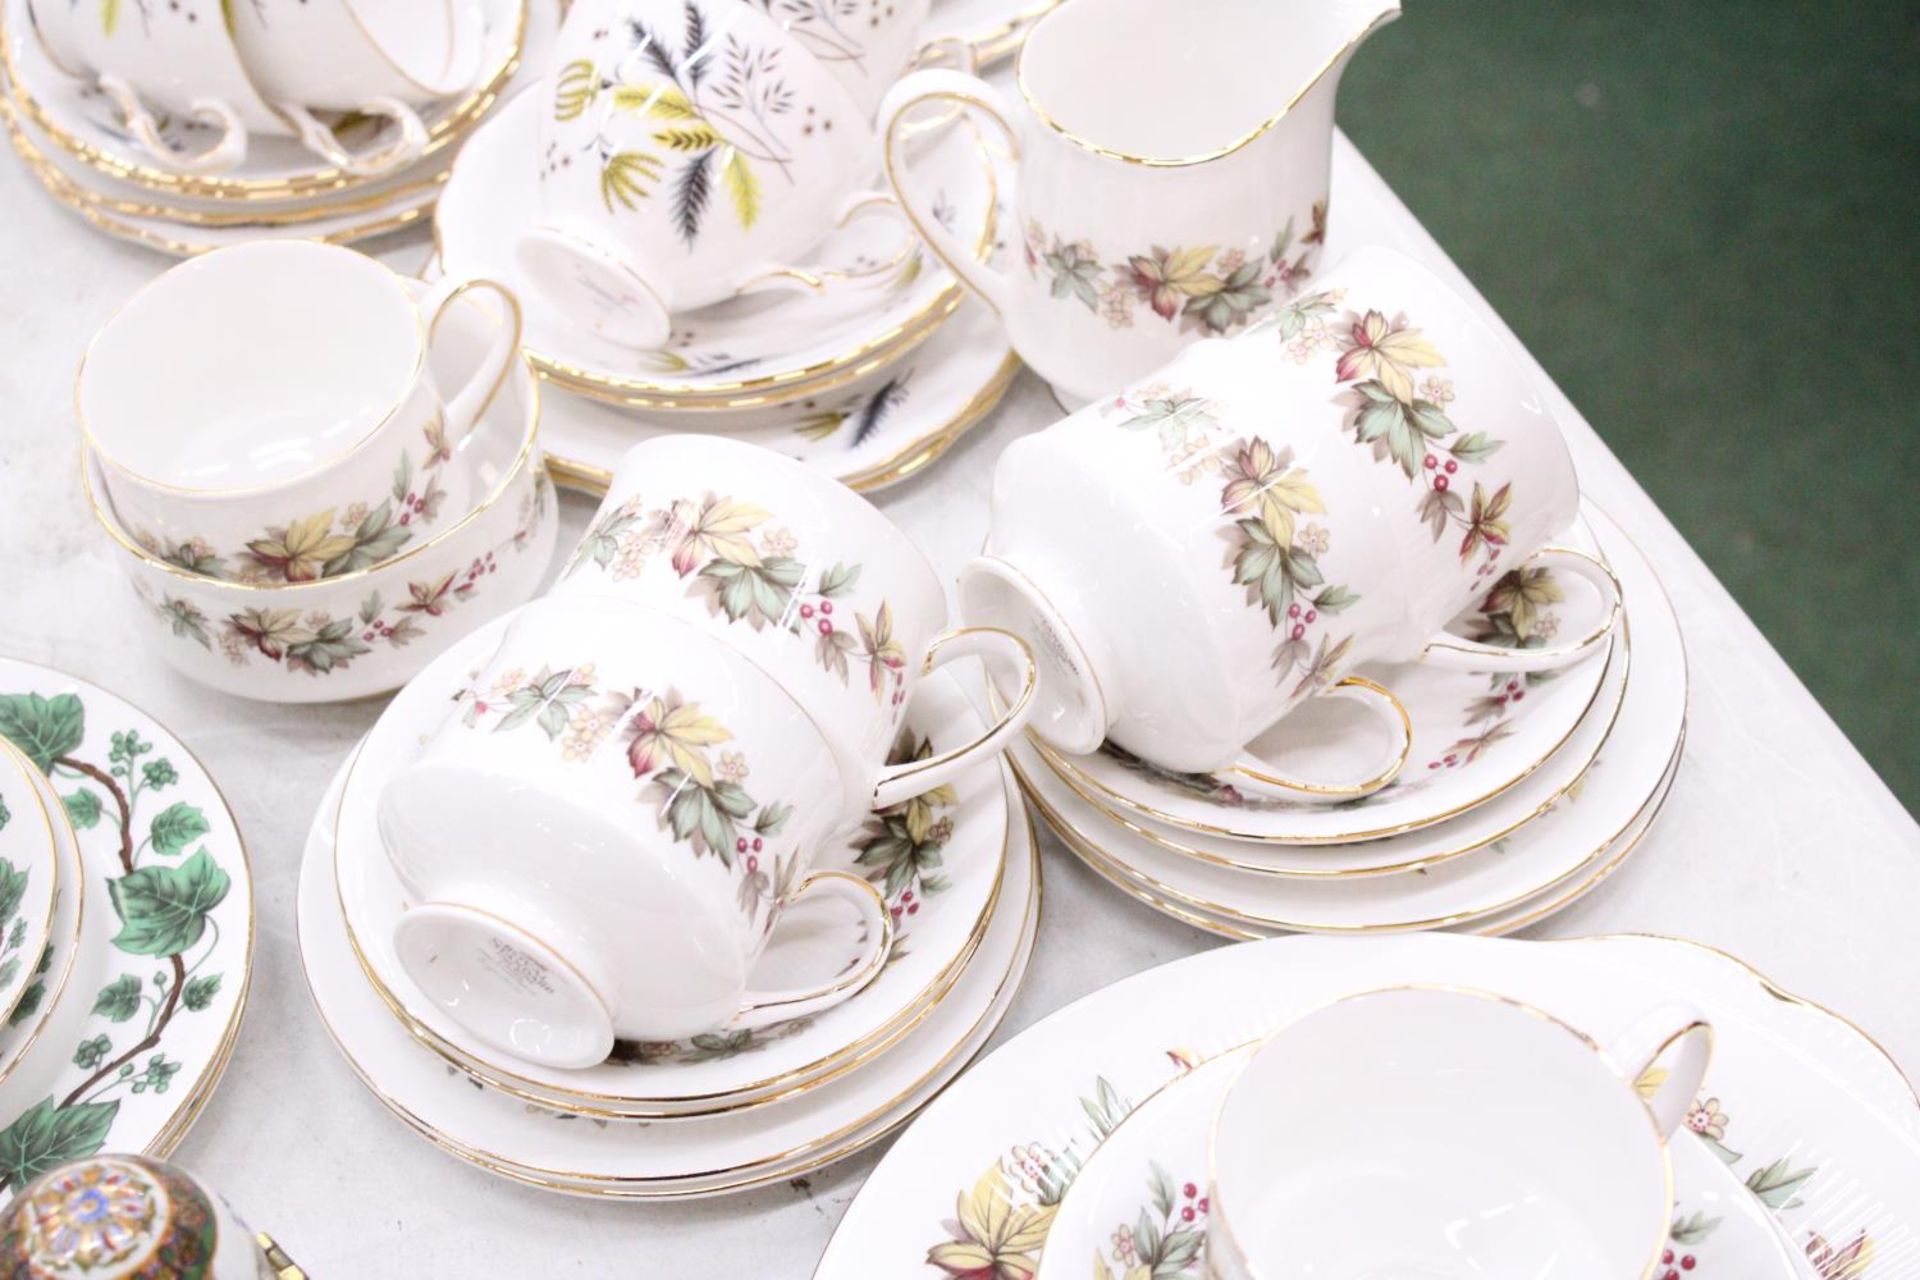 A QUANTITY OF CHINA TEAWARE TO INCLUDE ROYAL STANDARD AND COLCLOUGH - CUPS, SAUCERS, SIDE PLATES, - Bild 3 aus 5